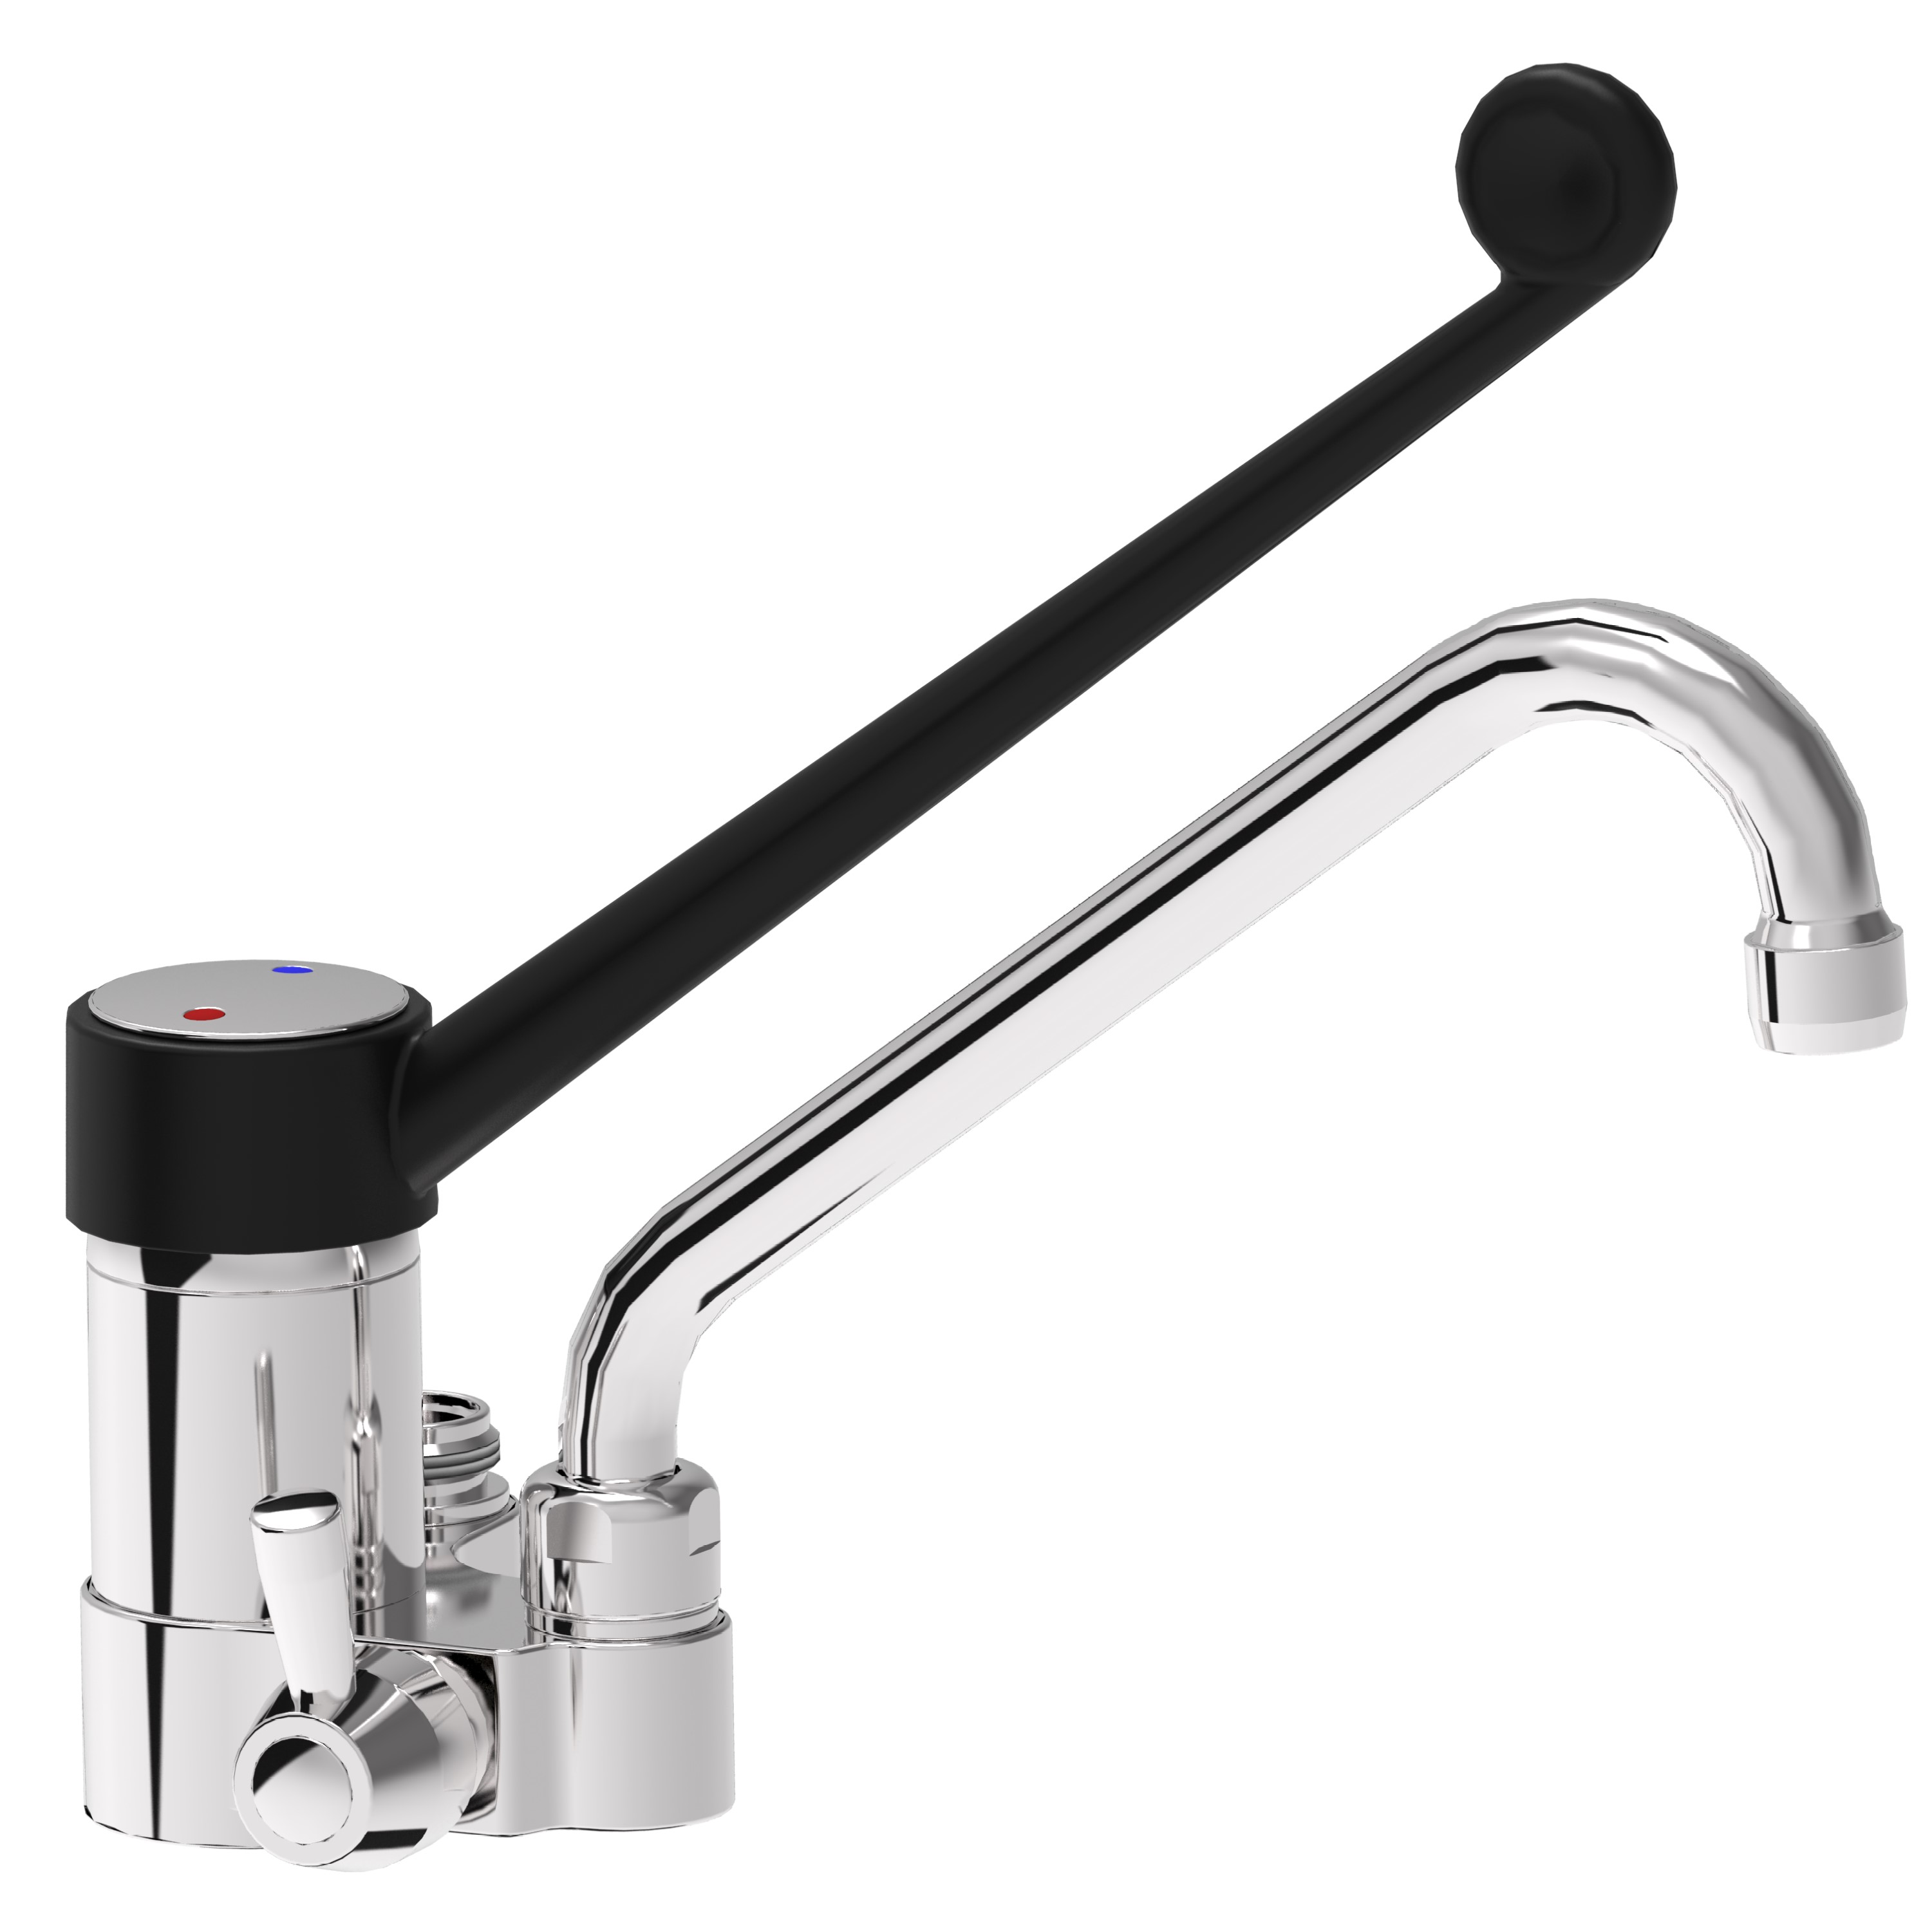 Turn monoblock long lever mixer tap with attachment to shower units	